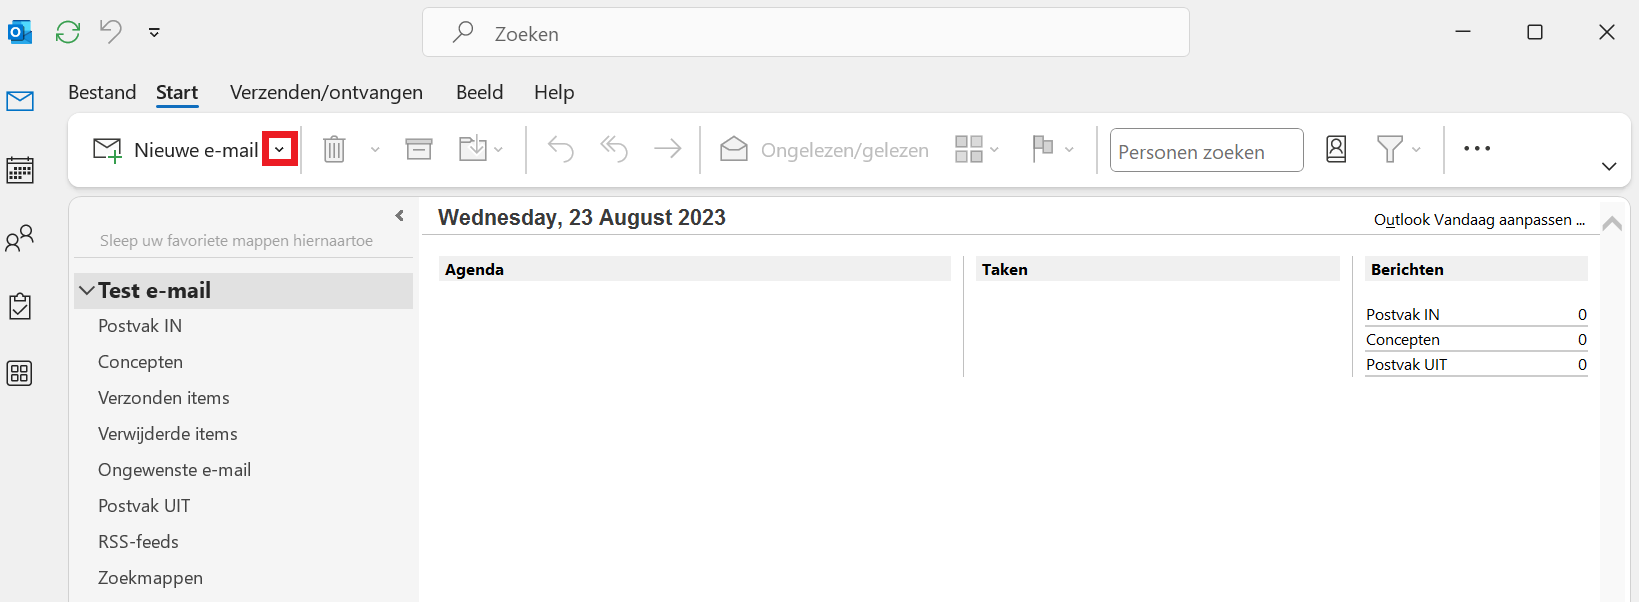 Outlook - Startpagina - Dropdown nieuwe e-mail.png